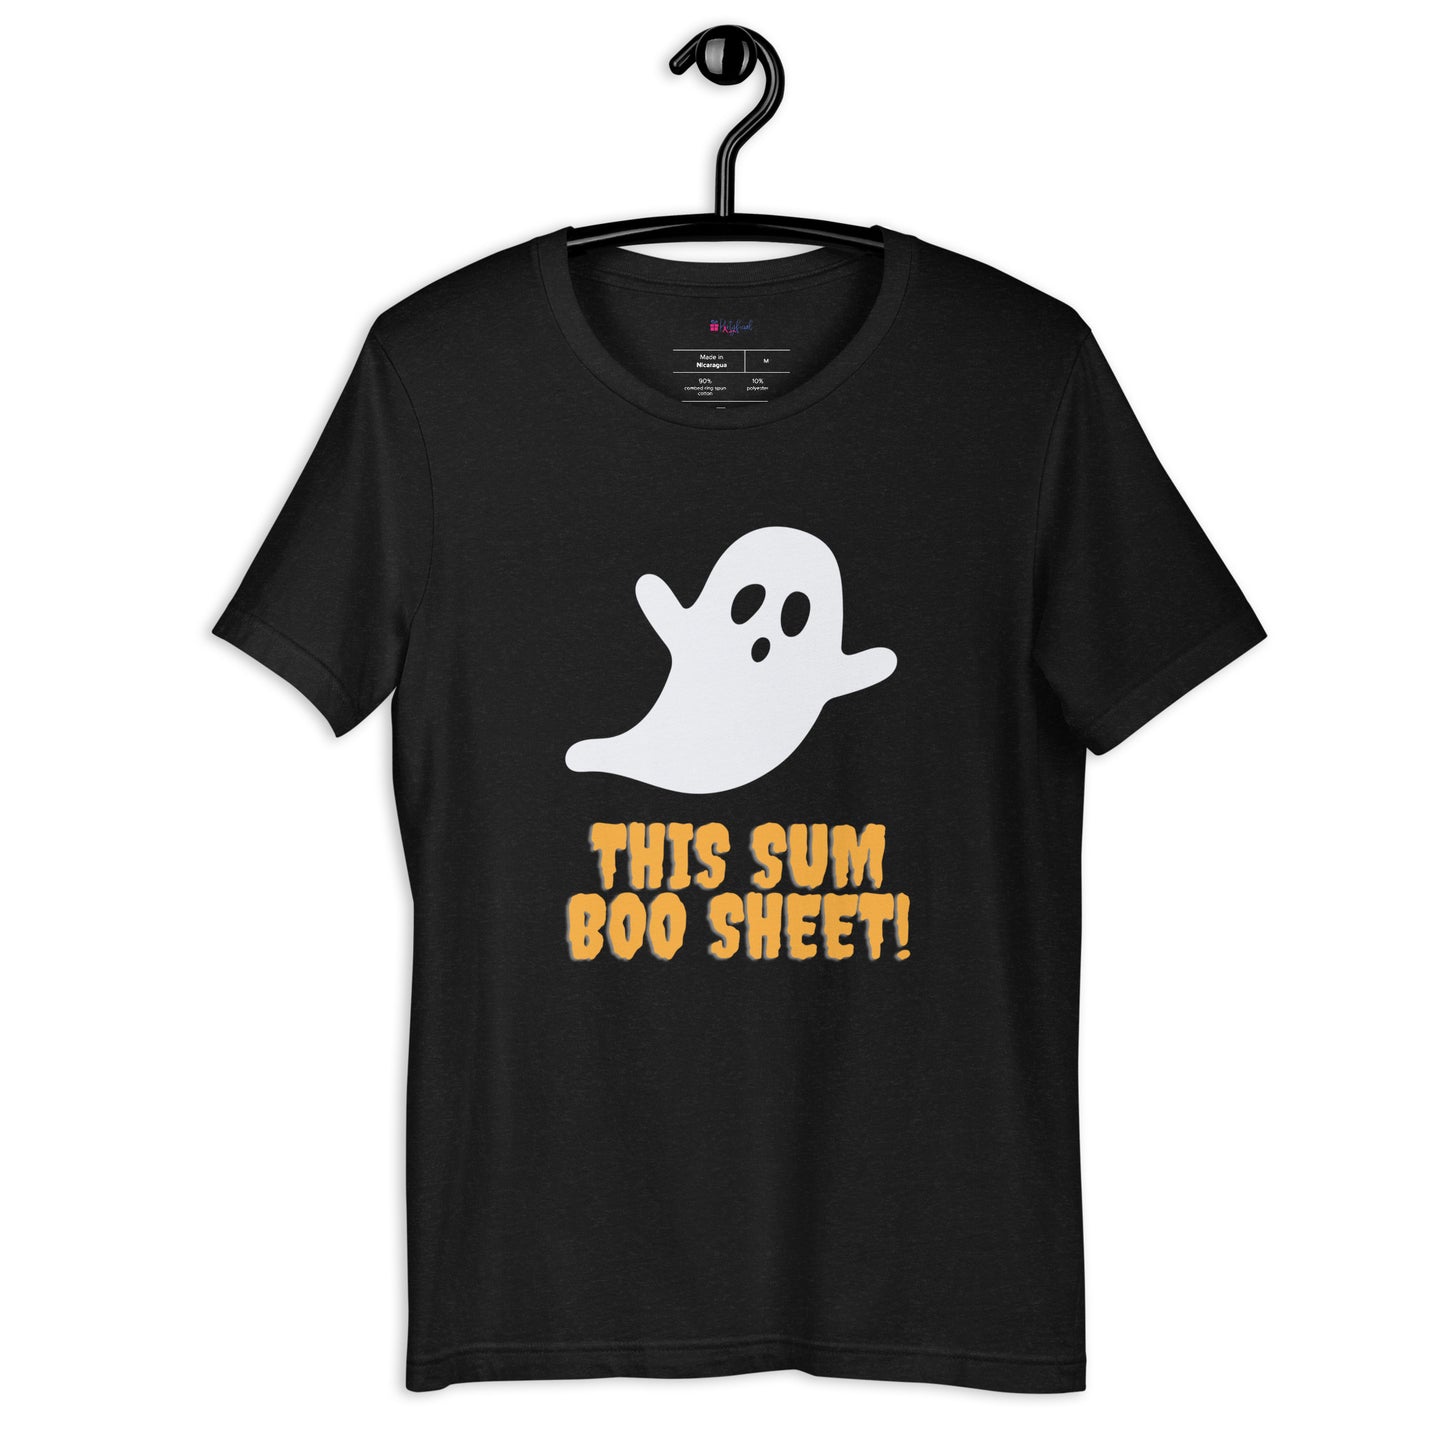 This is Boo Sheet! t-shirt